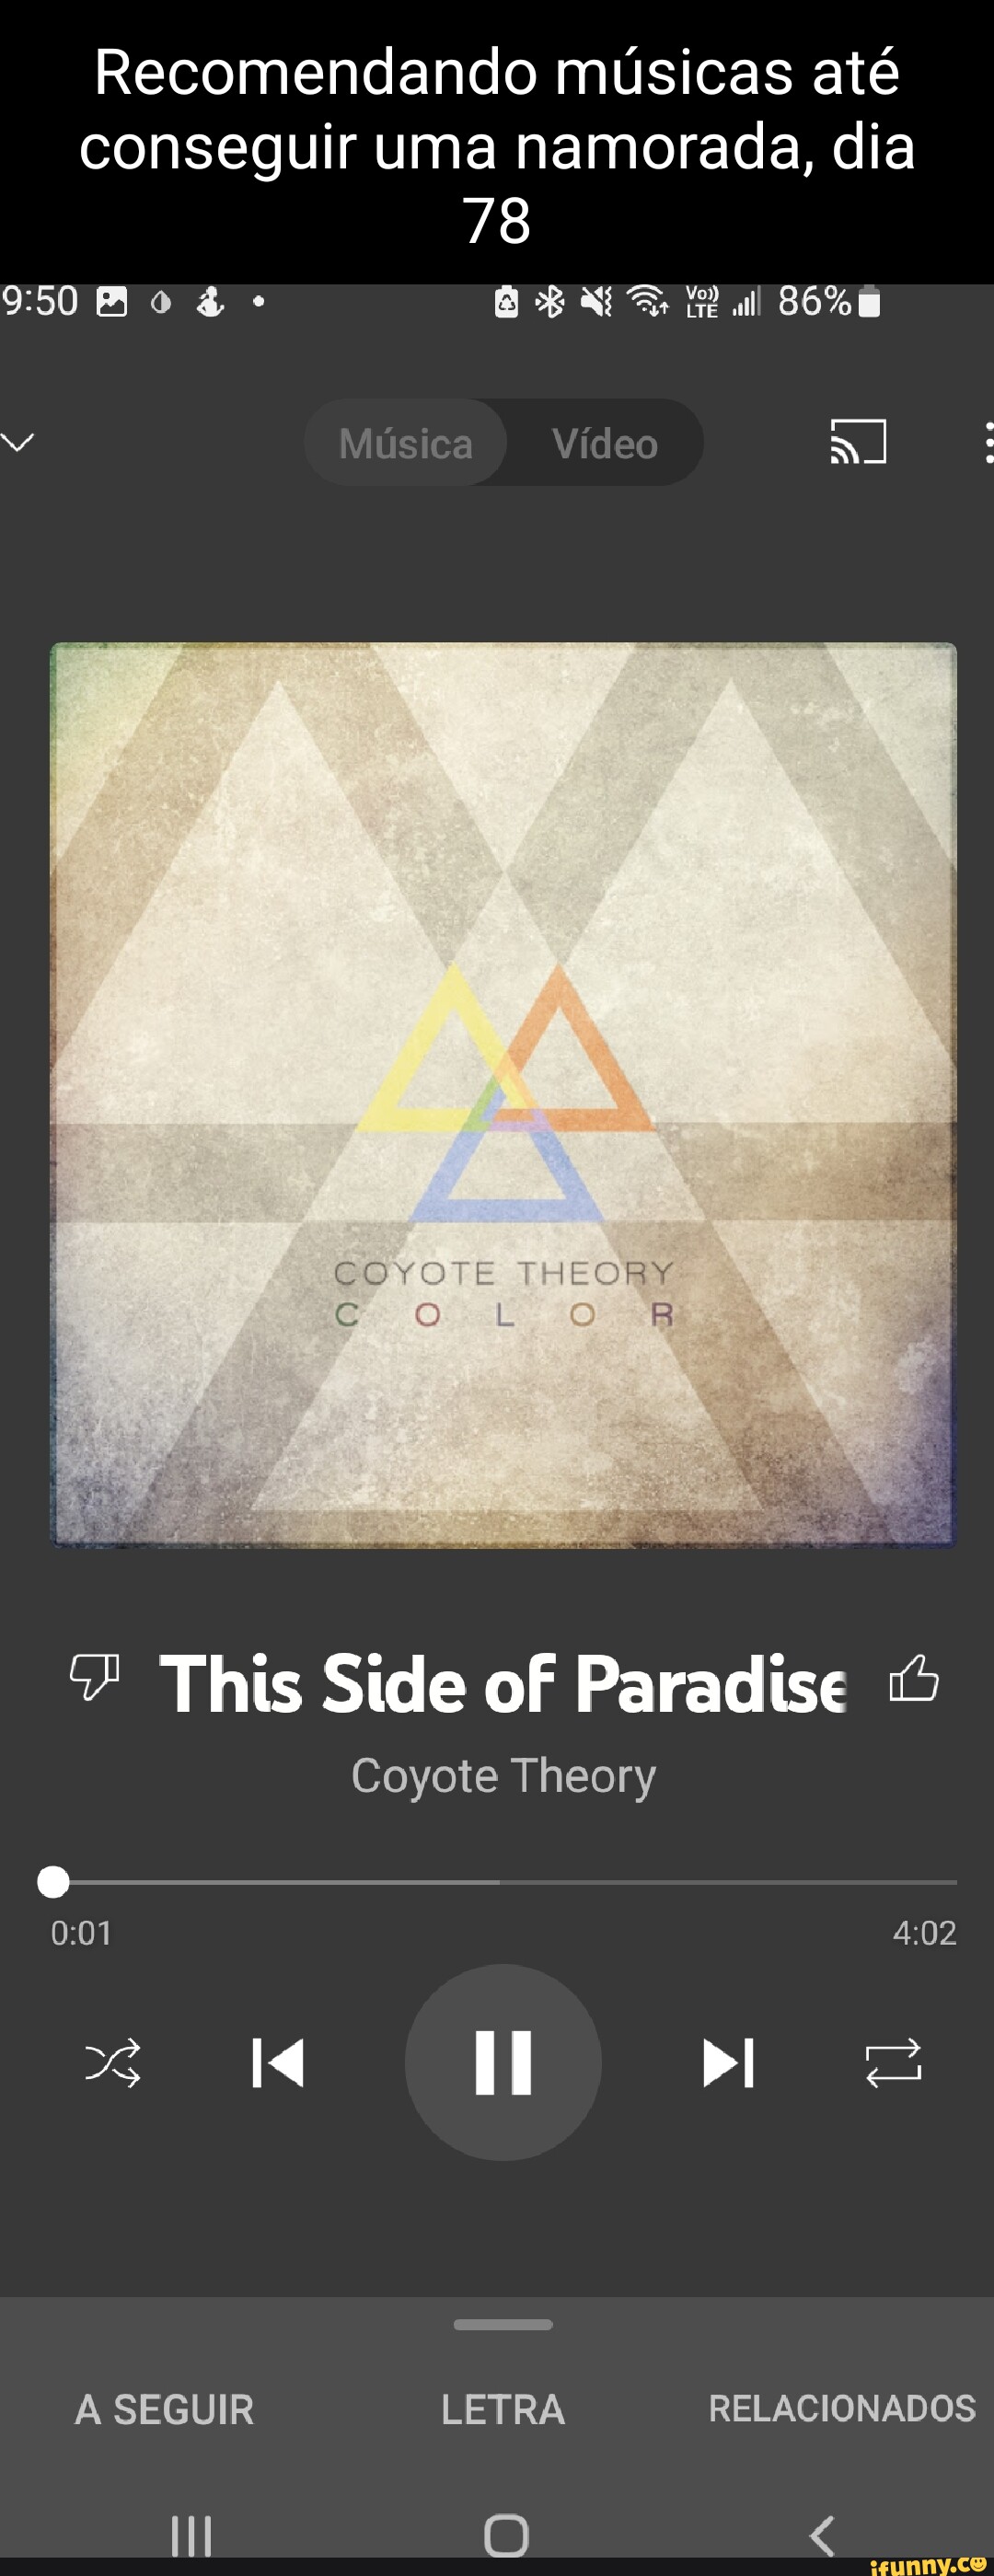 this side of paradise-coyote theory